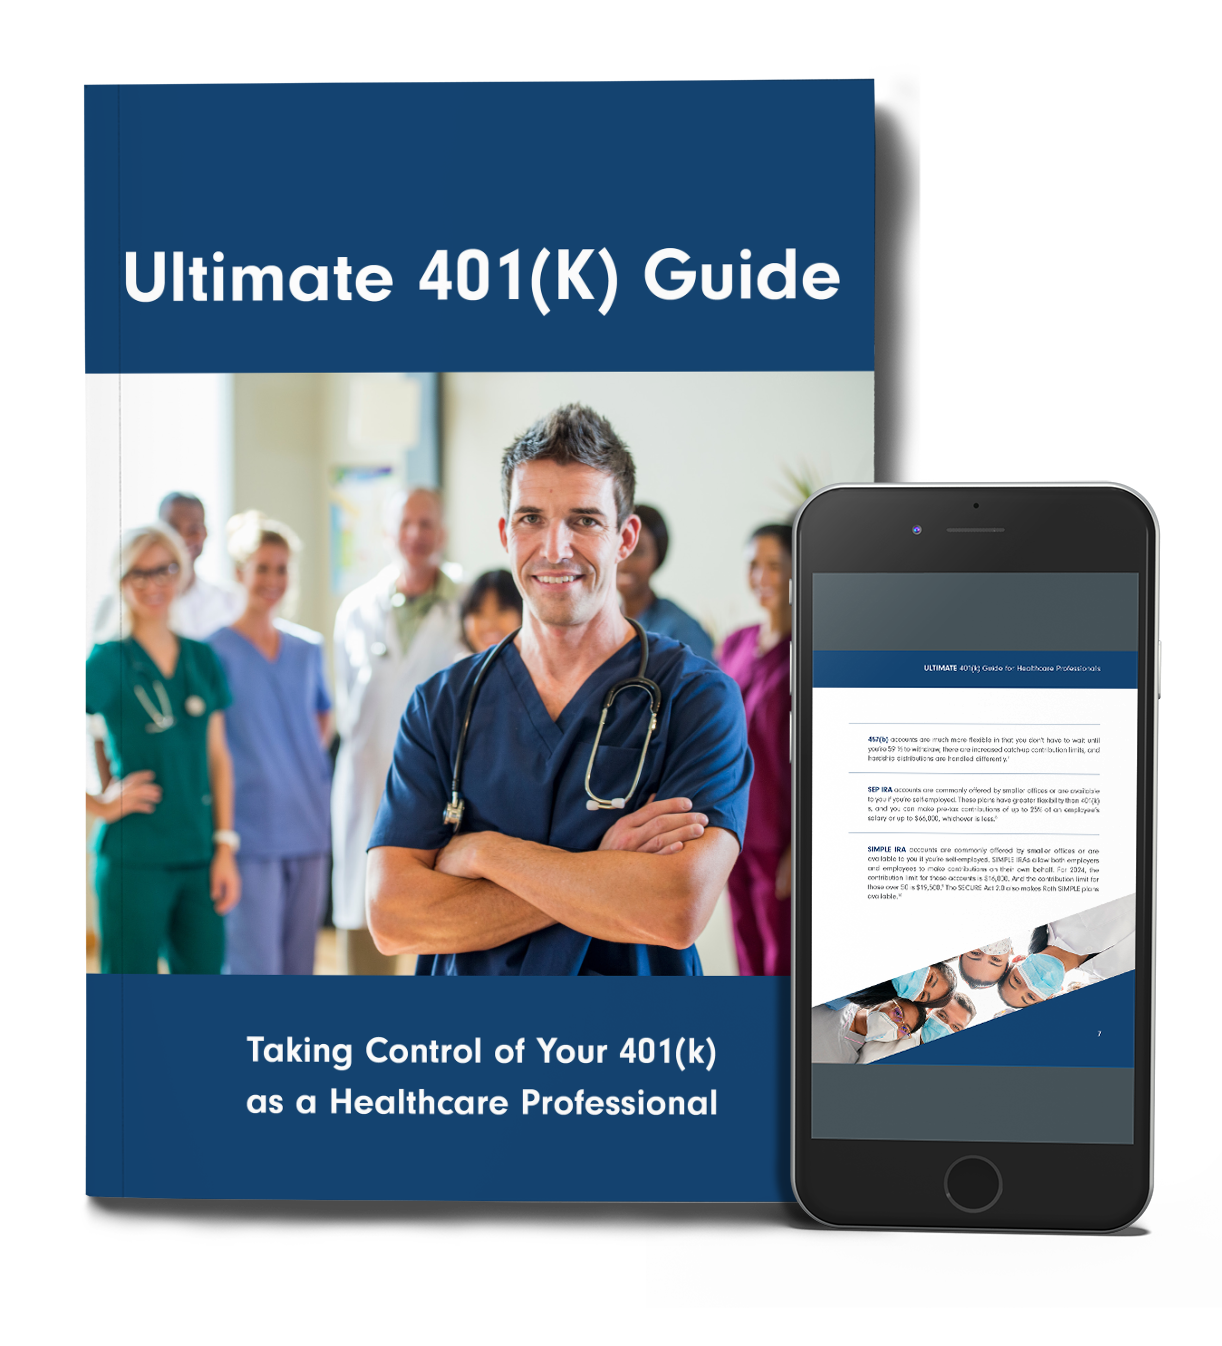 The Ultimate 401(k) Guide. Taking Control of Your 401(k) as a Healthcare